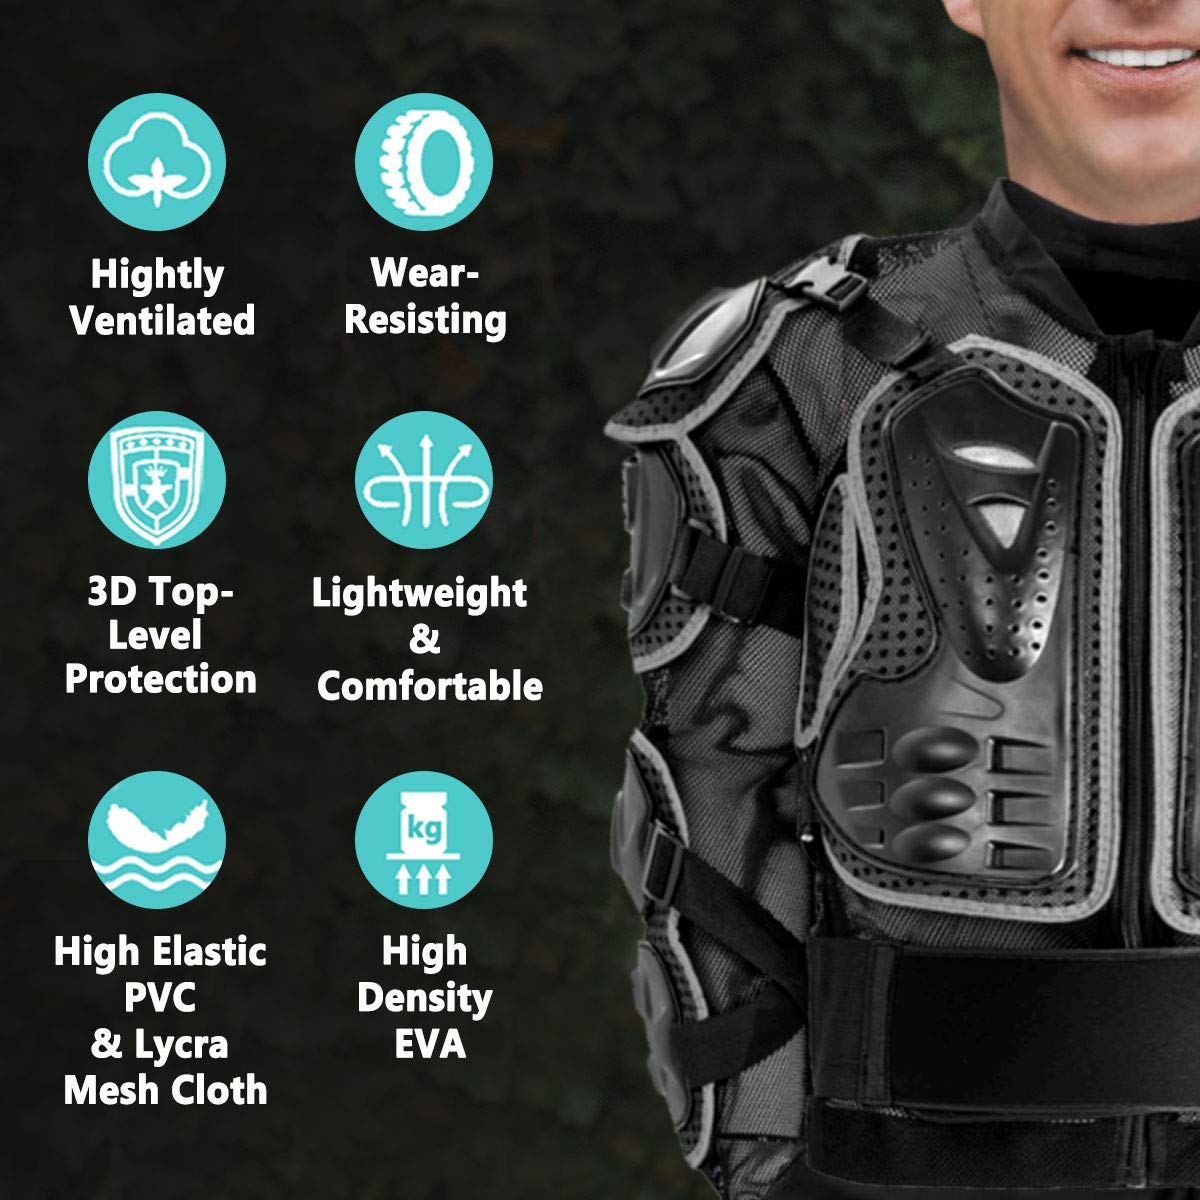 Motorcycle Protective Jacket Full Body Armor Protection Dirt Bike Gear ATV Protective Safety Gear Riding Racing Armor Motocross Protector Jacket Men Women For Off-Road Motorbike Cycling Skiing Skating